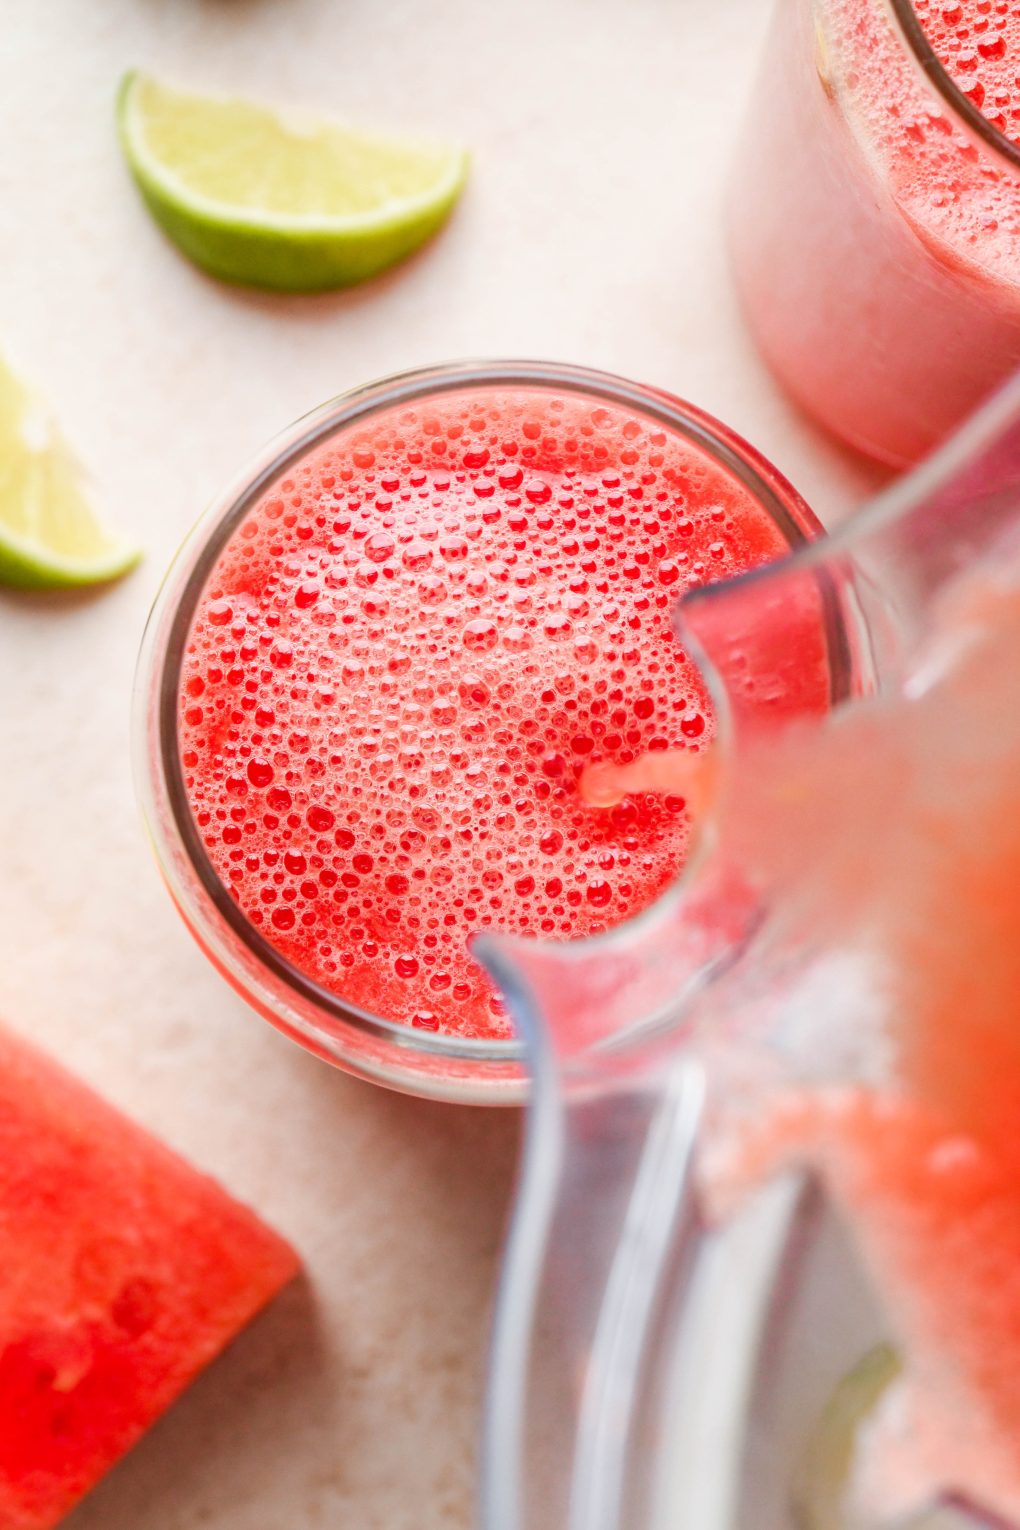 A blender container pouring watermelon juice into a cup on a light cream background, surrounded by lime wedges and cut watermelon slices.